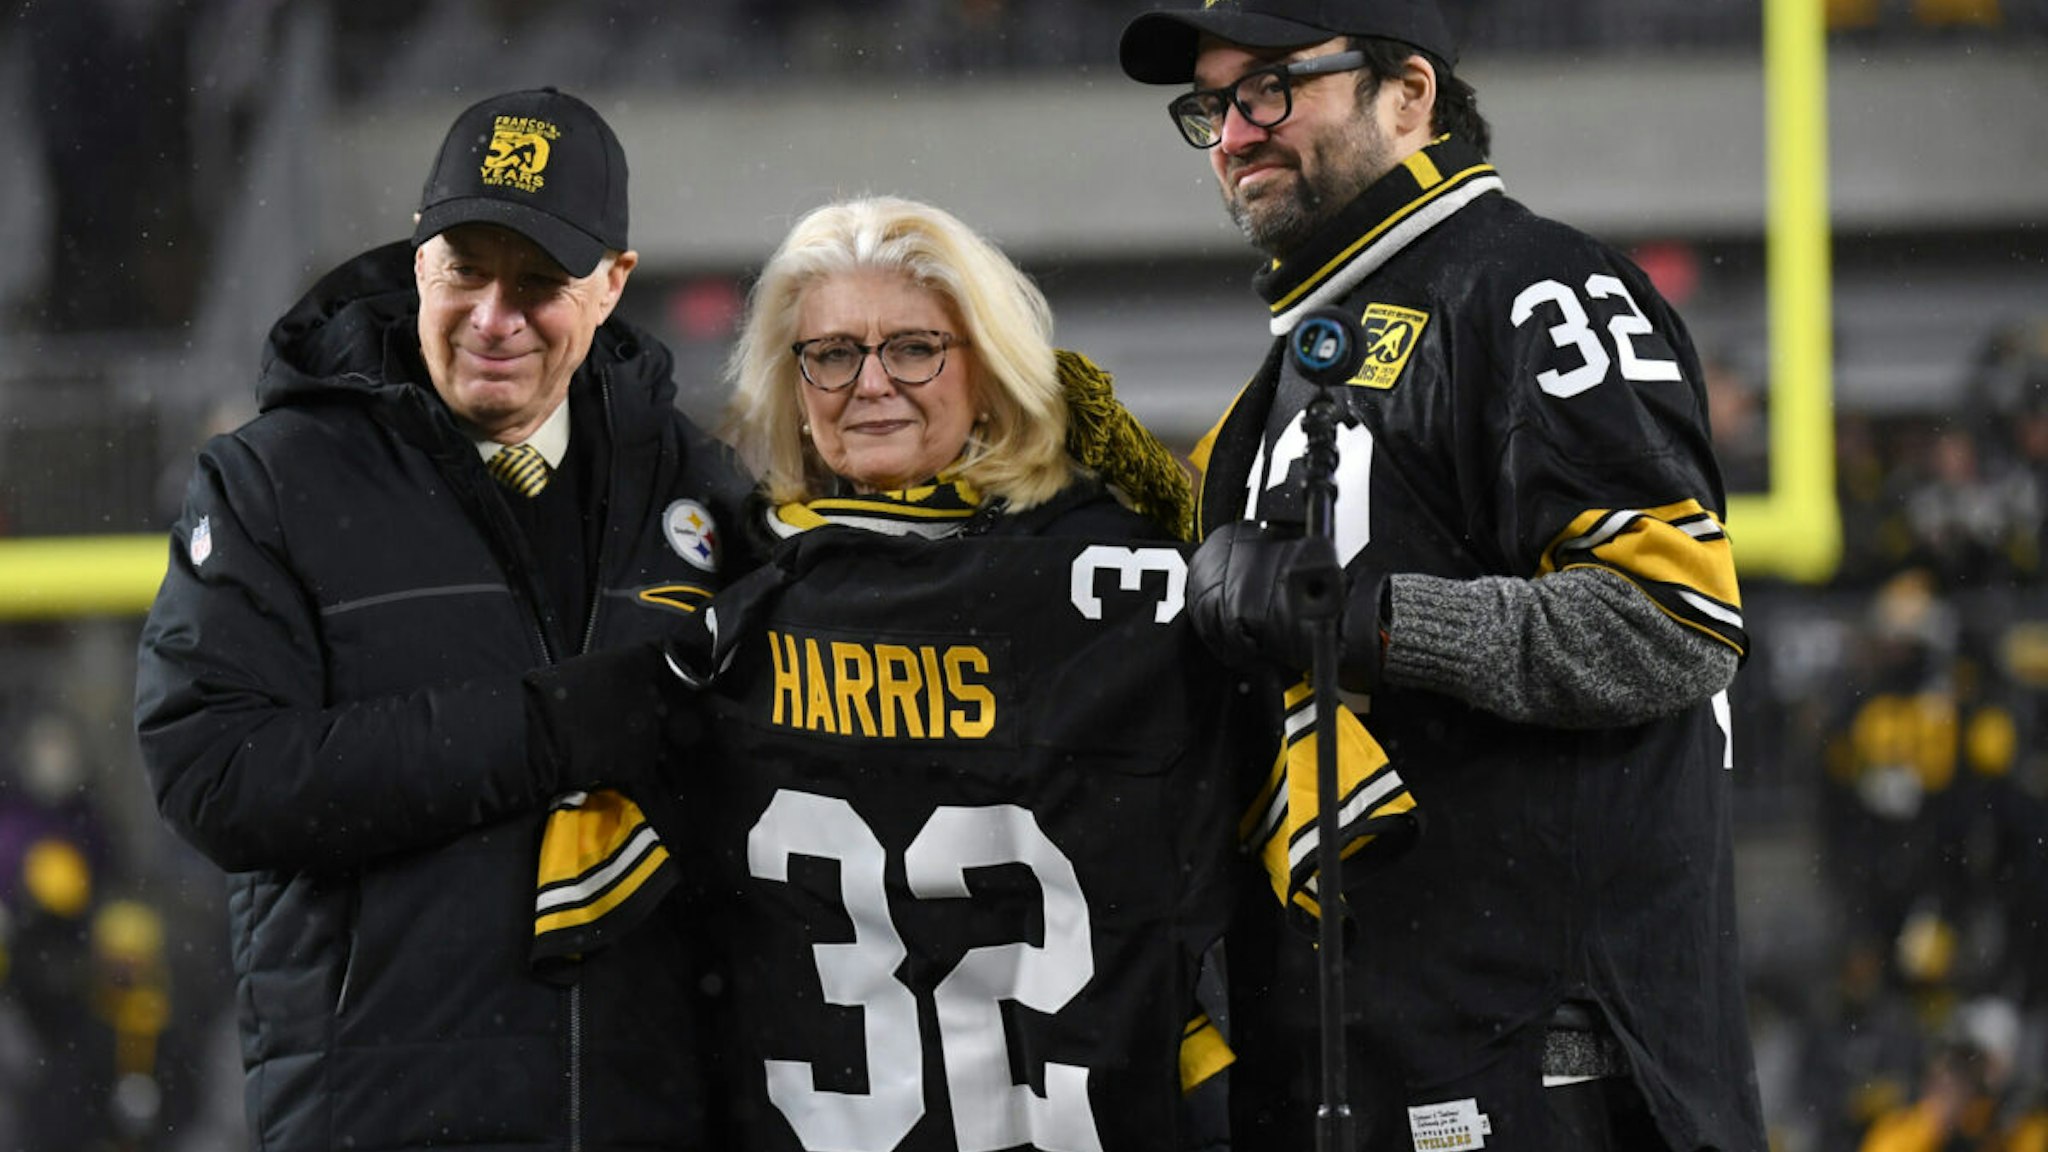 Franco Harris #32 is honored in a memorial at halftime with his wife and son in attendance during the game against the Las Vegas Raiders at Acrisure Stadium on December 24, 2022 in Pittsburgh, Pennsylvania